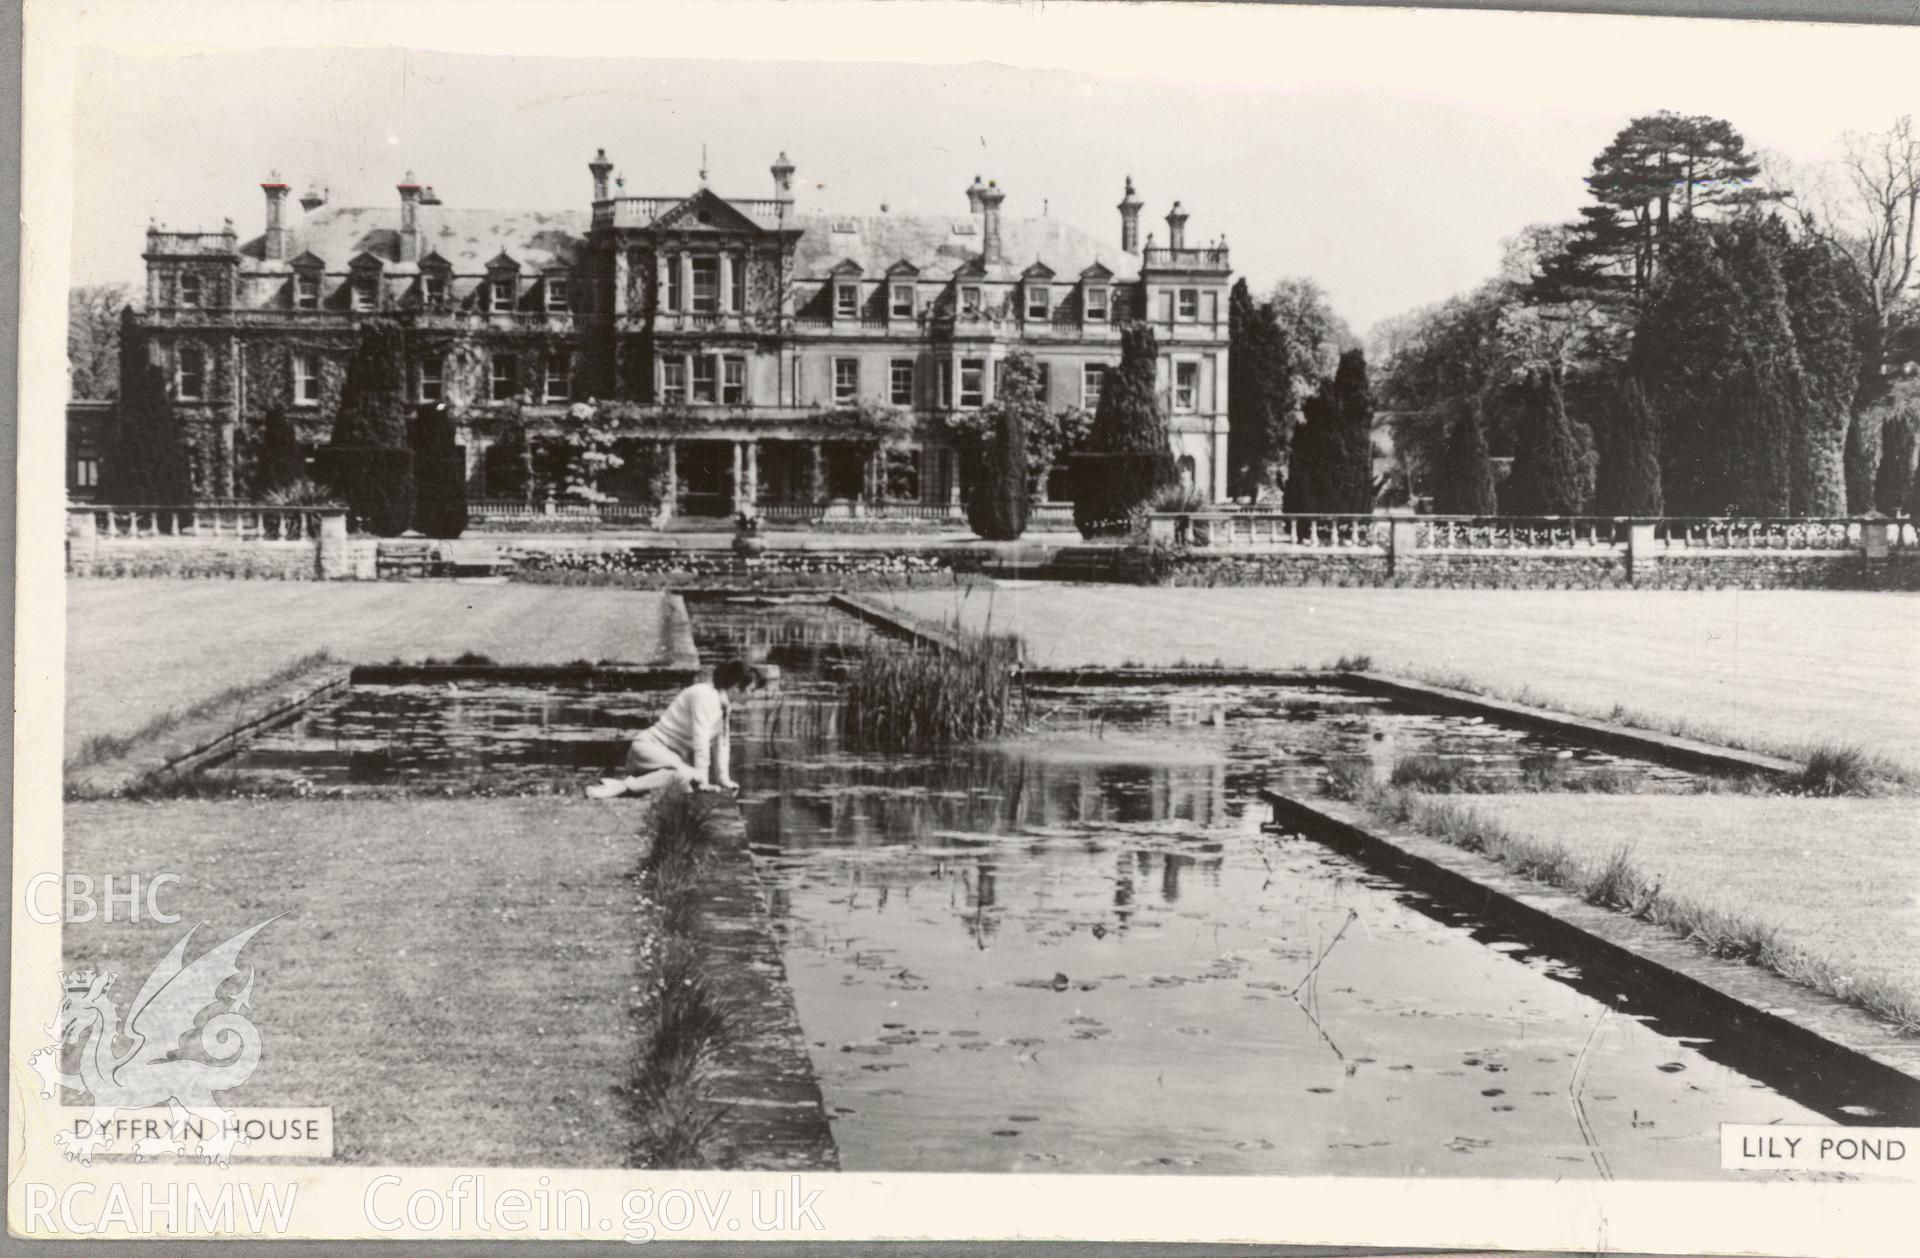 Digitised postcard image of Dyffryn house with lily pond, St Nicholas and Bonvilston. Produced by Parks and Gardens Data Services, from an original item in the Peter Davis Collection at Parks and Gardens UK. We hold only web-resolution images of this collection, suitable for viewing on screen and for research purposes only. We do not hold the original images, or publication quality scans.